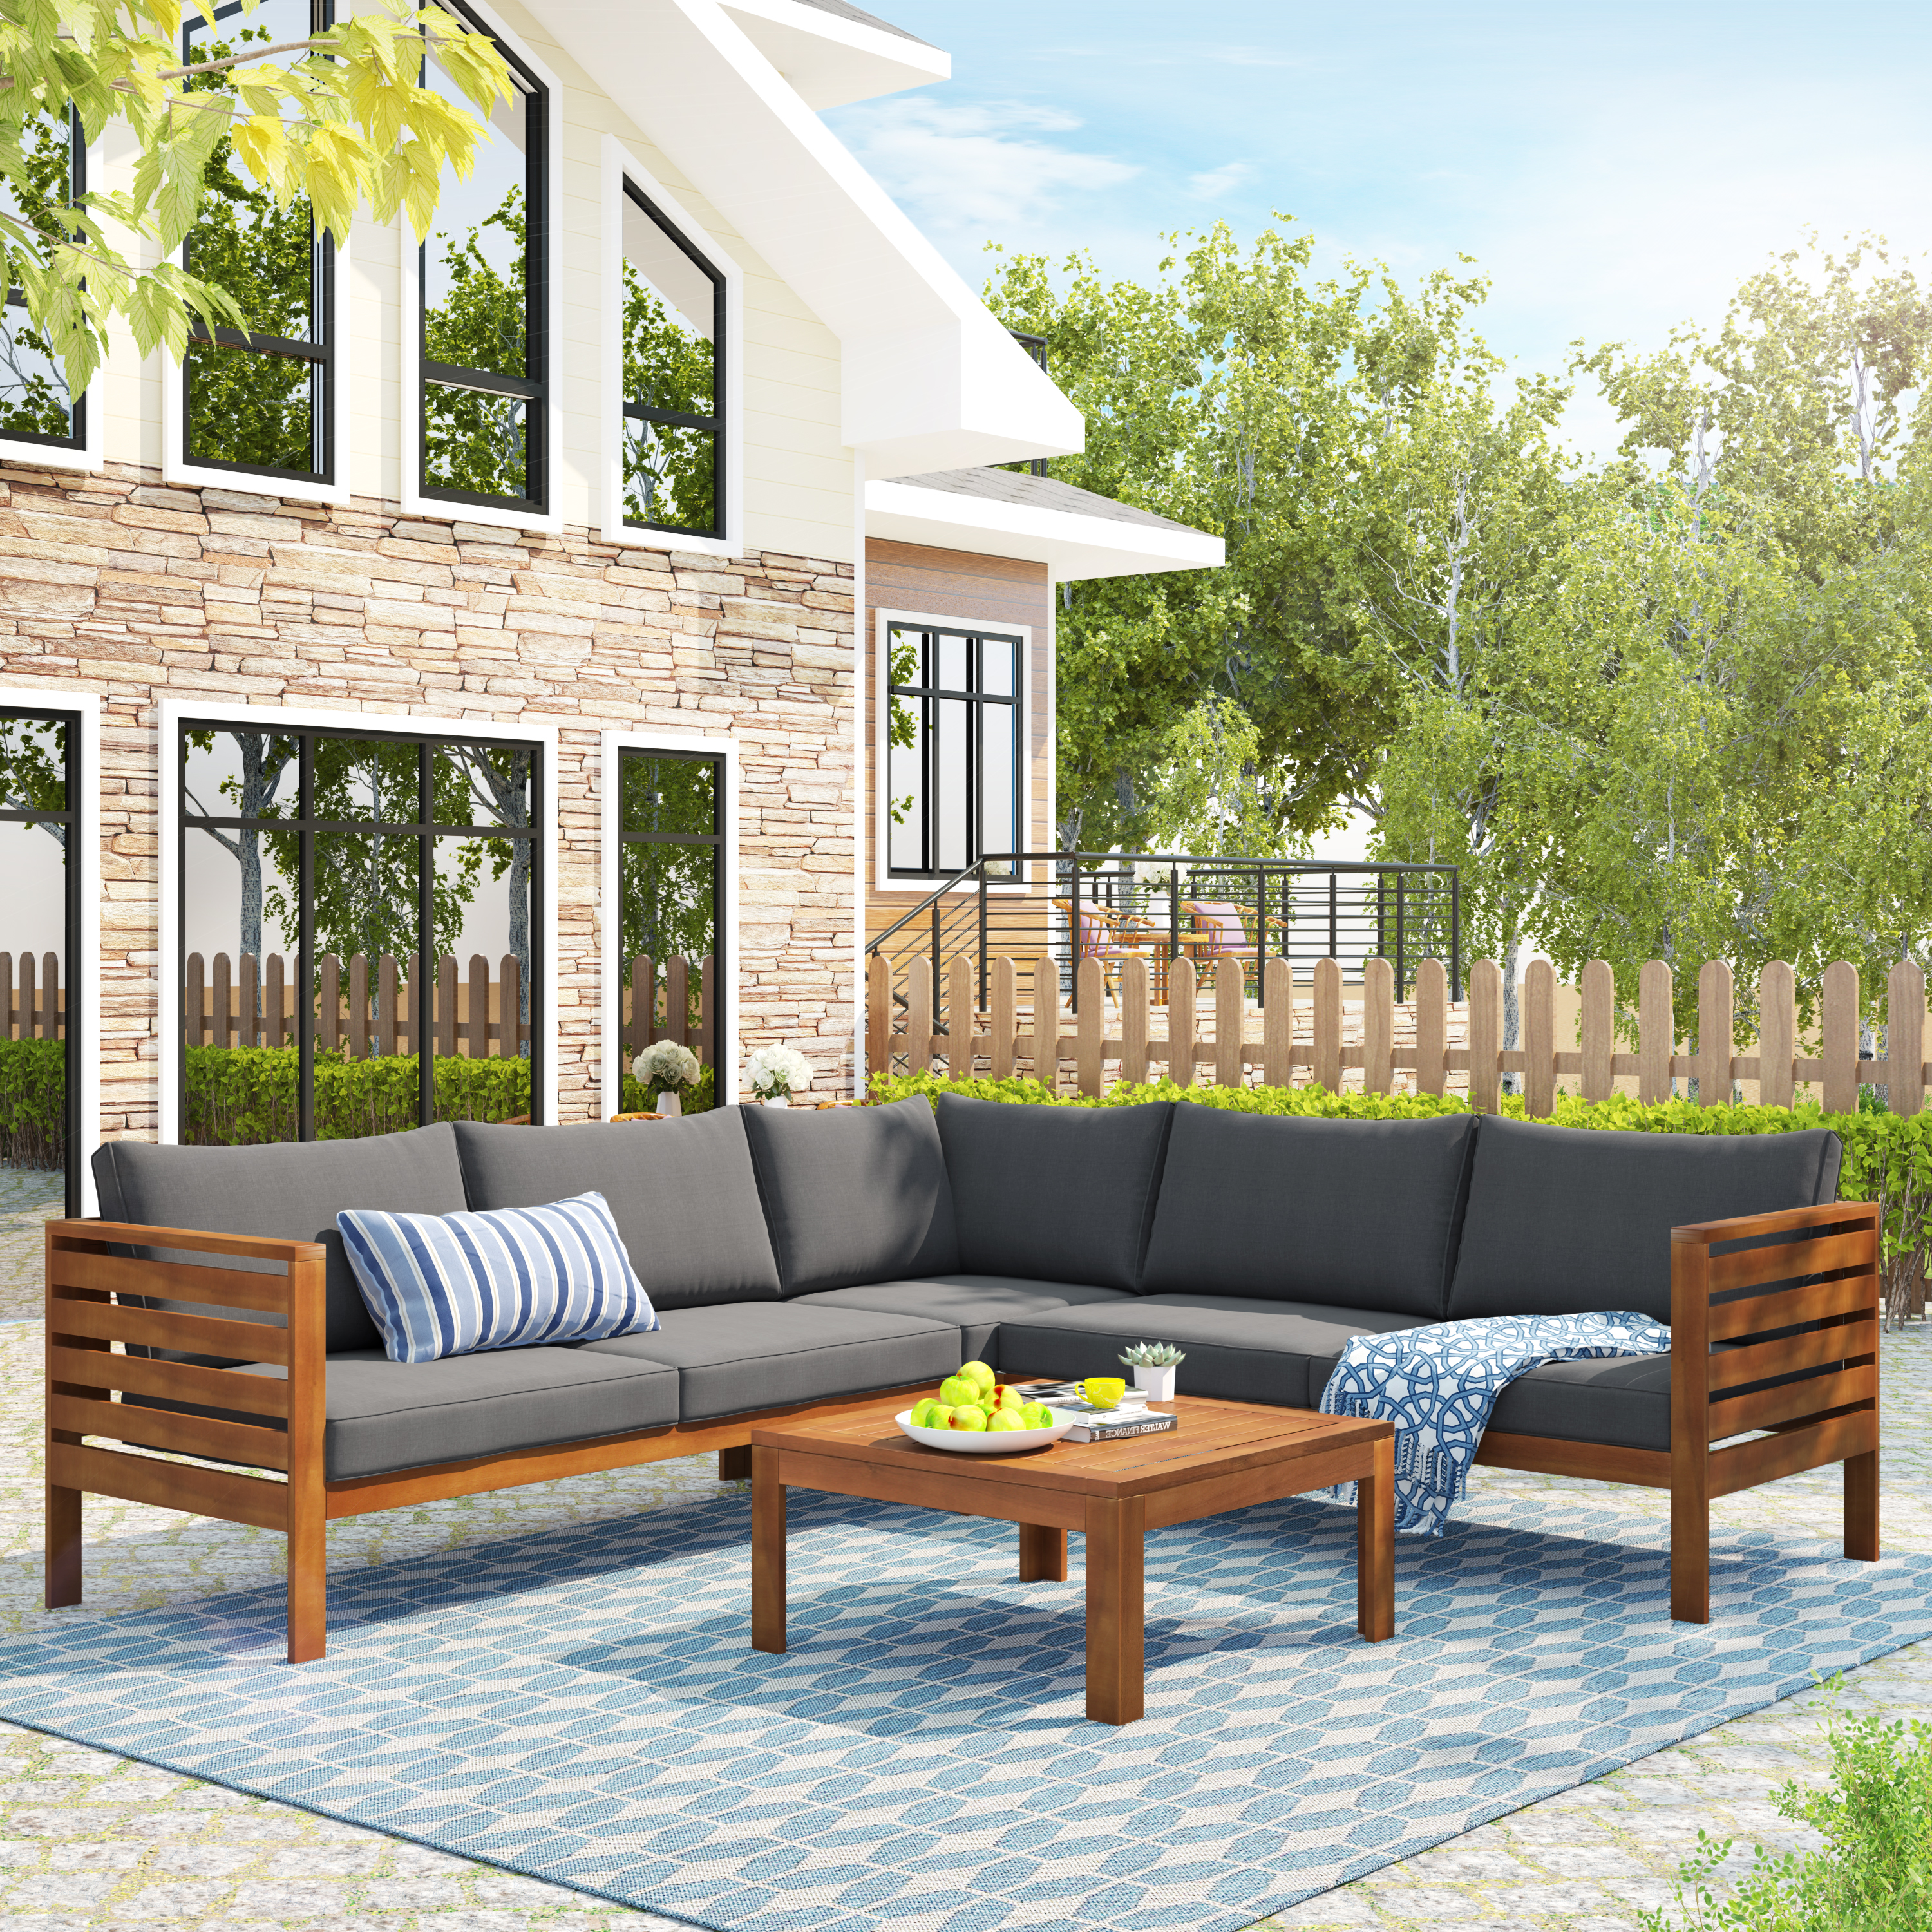 Wood Structure Outdoor Sofa Set with gray Cushions Exotic design Water-resistant and UV Protected texture Two-person Sofa One Corner Sofa plus One Coffee Table Strong Metal Accessories-Boyel Living